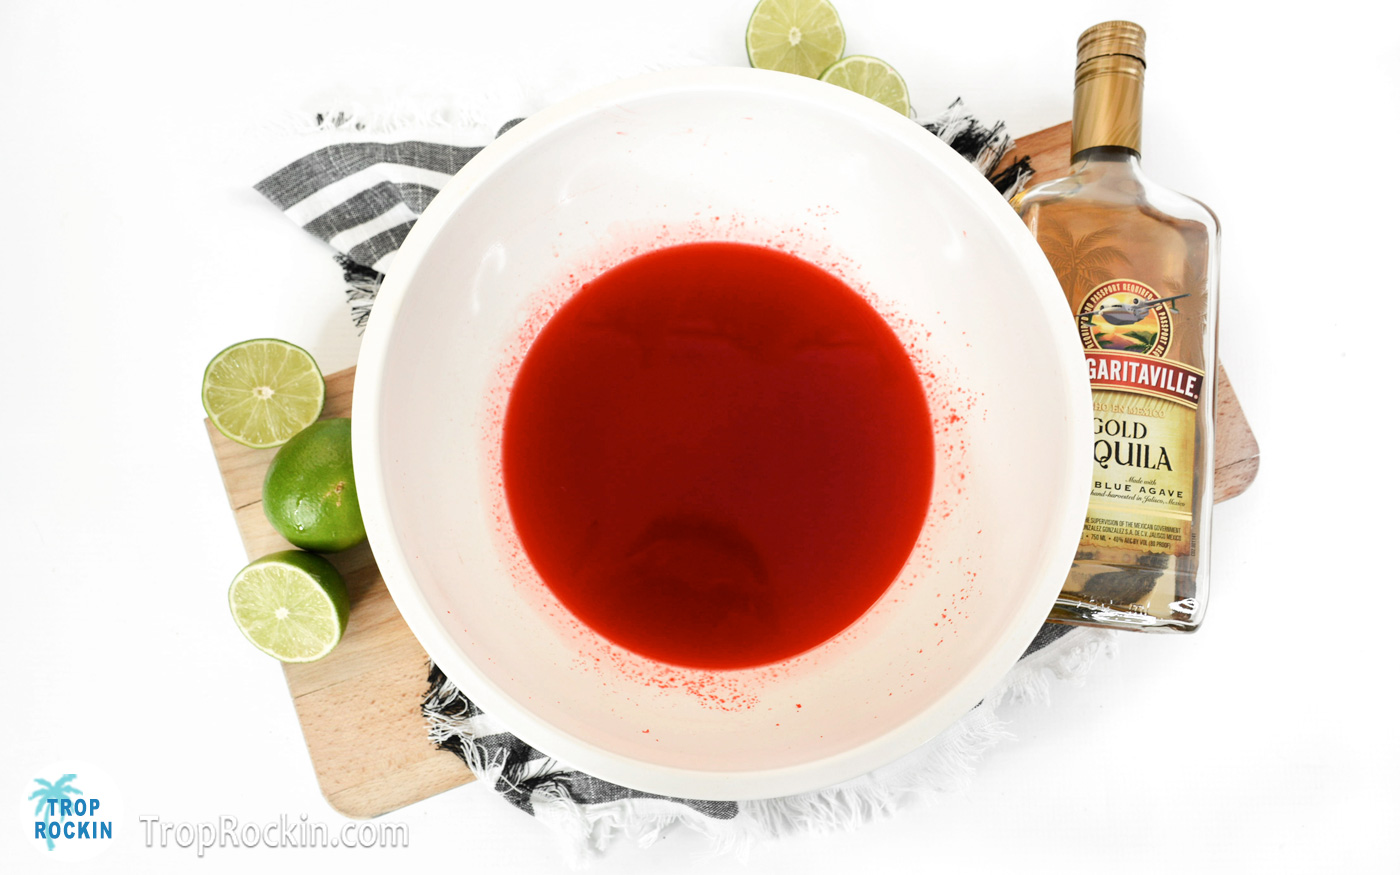 Strawberry jello mixed with water and tequila in a large bowl with a bottle of tequila and fresh limes in background.